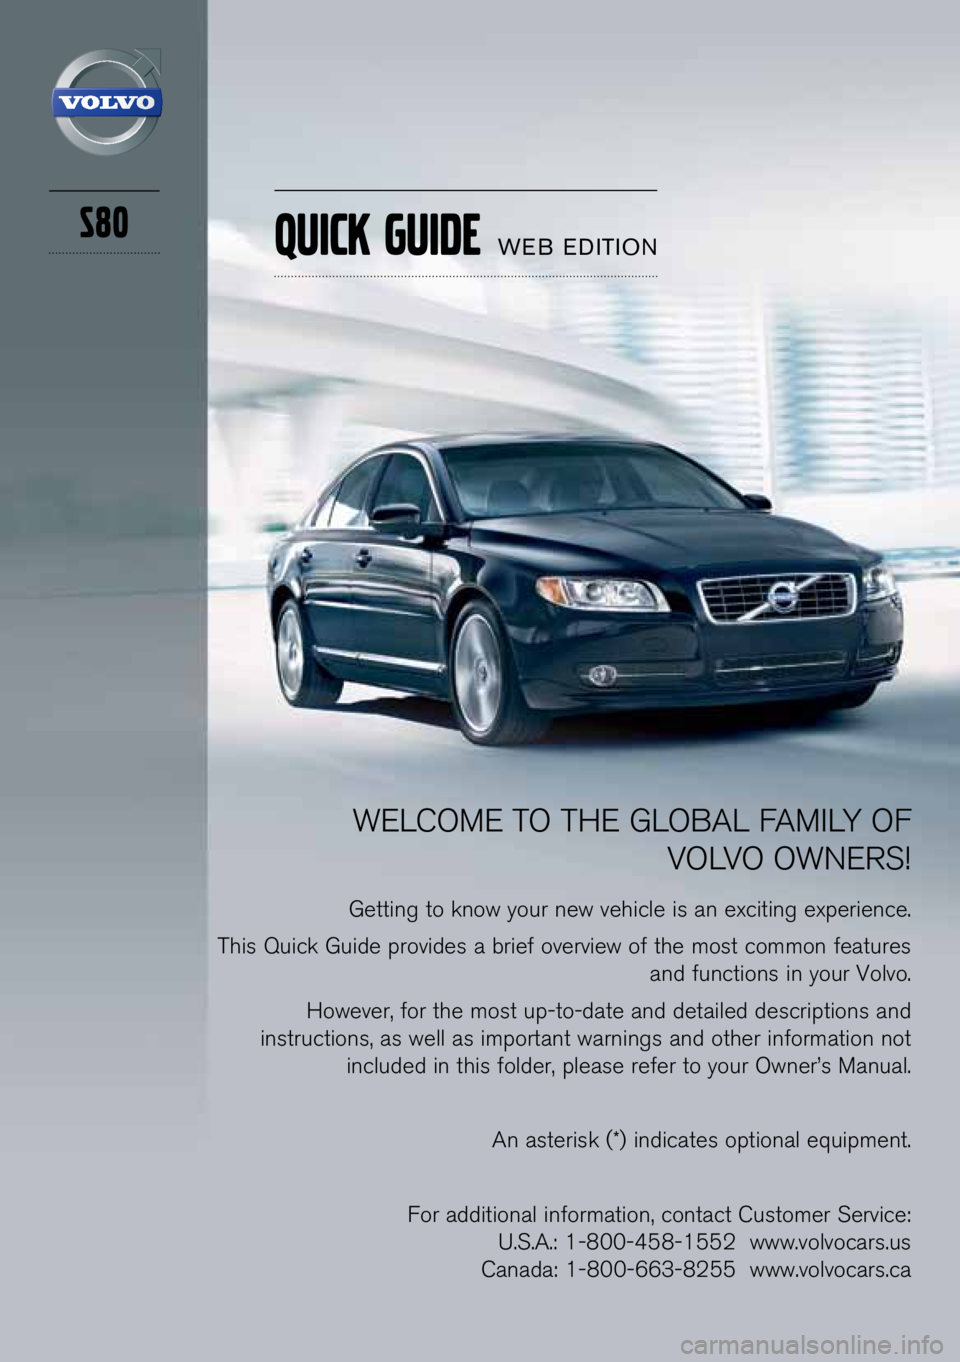 VOLVO S80 2013  Quick Guide S80
WELCOME TO THE GLOBAL FAMILY OF VOLVO OWNE\fS!
Ge\b\bing \bo know your new vehicle is an exci\bing experience.
This Quick Guide provides a brief overview of \bhe mos\b common fea\bures  and func\b